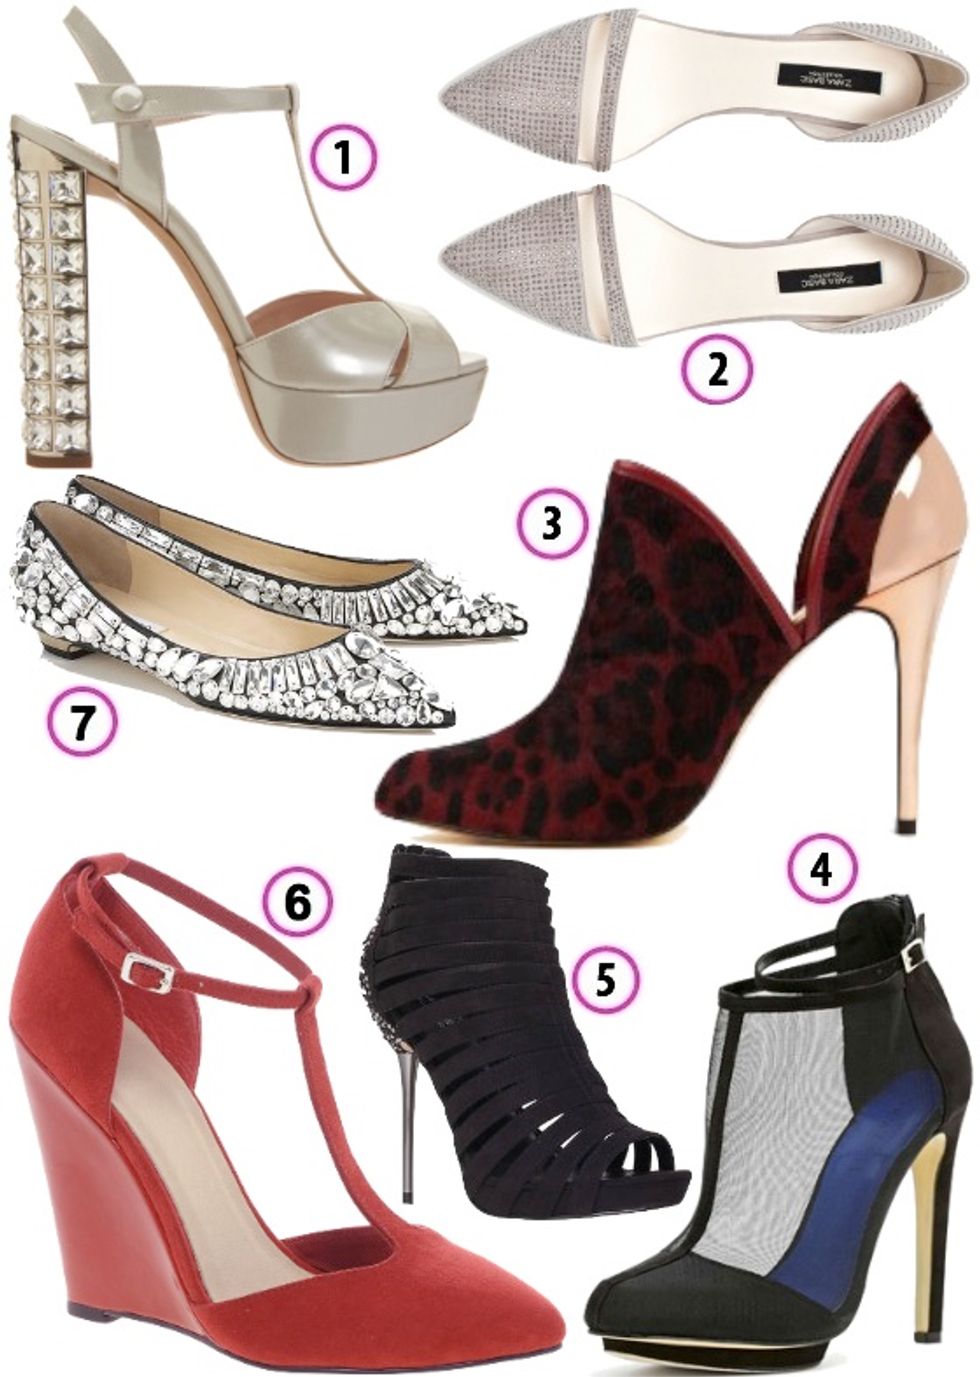 Look of the Week: NYE Shoes that Won't Kill Your Feet